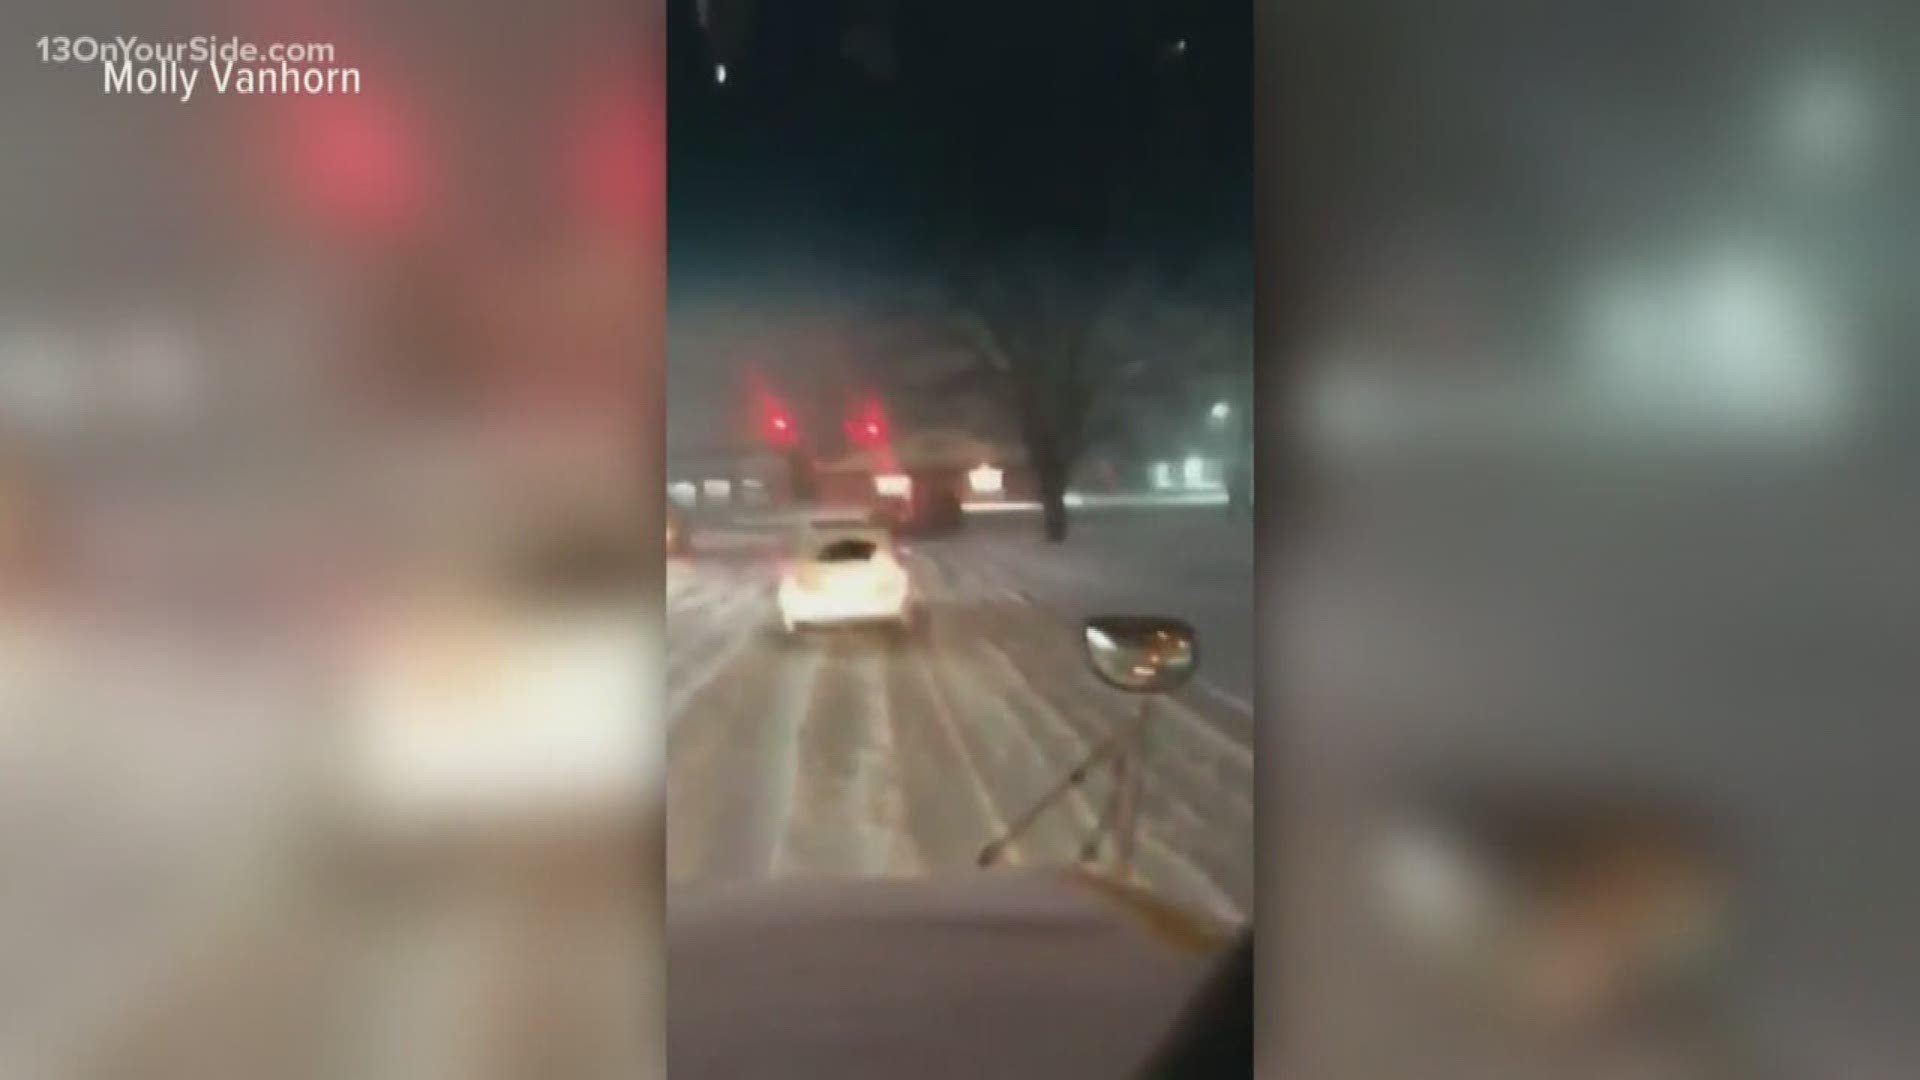 The wrestling team pushed a car out of the snow at 5:30 a.m. on Saturday.